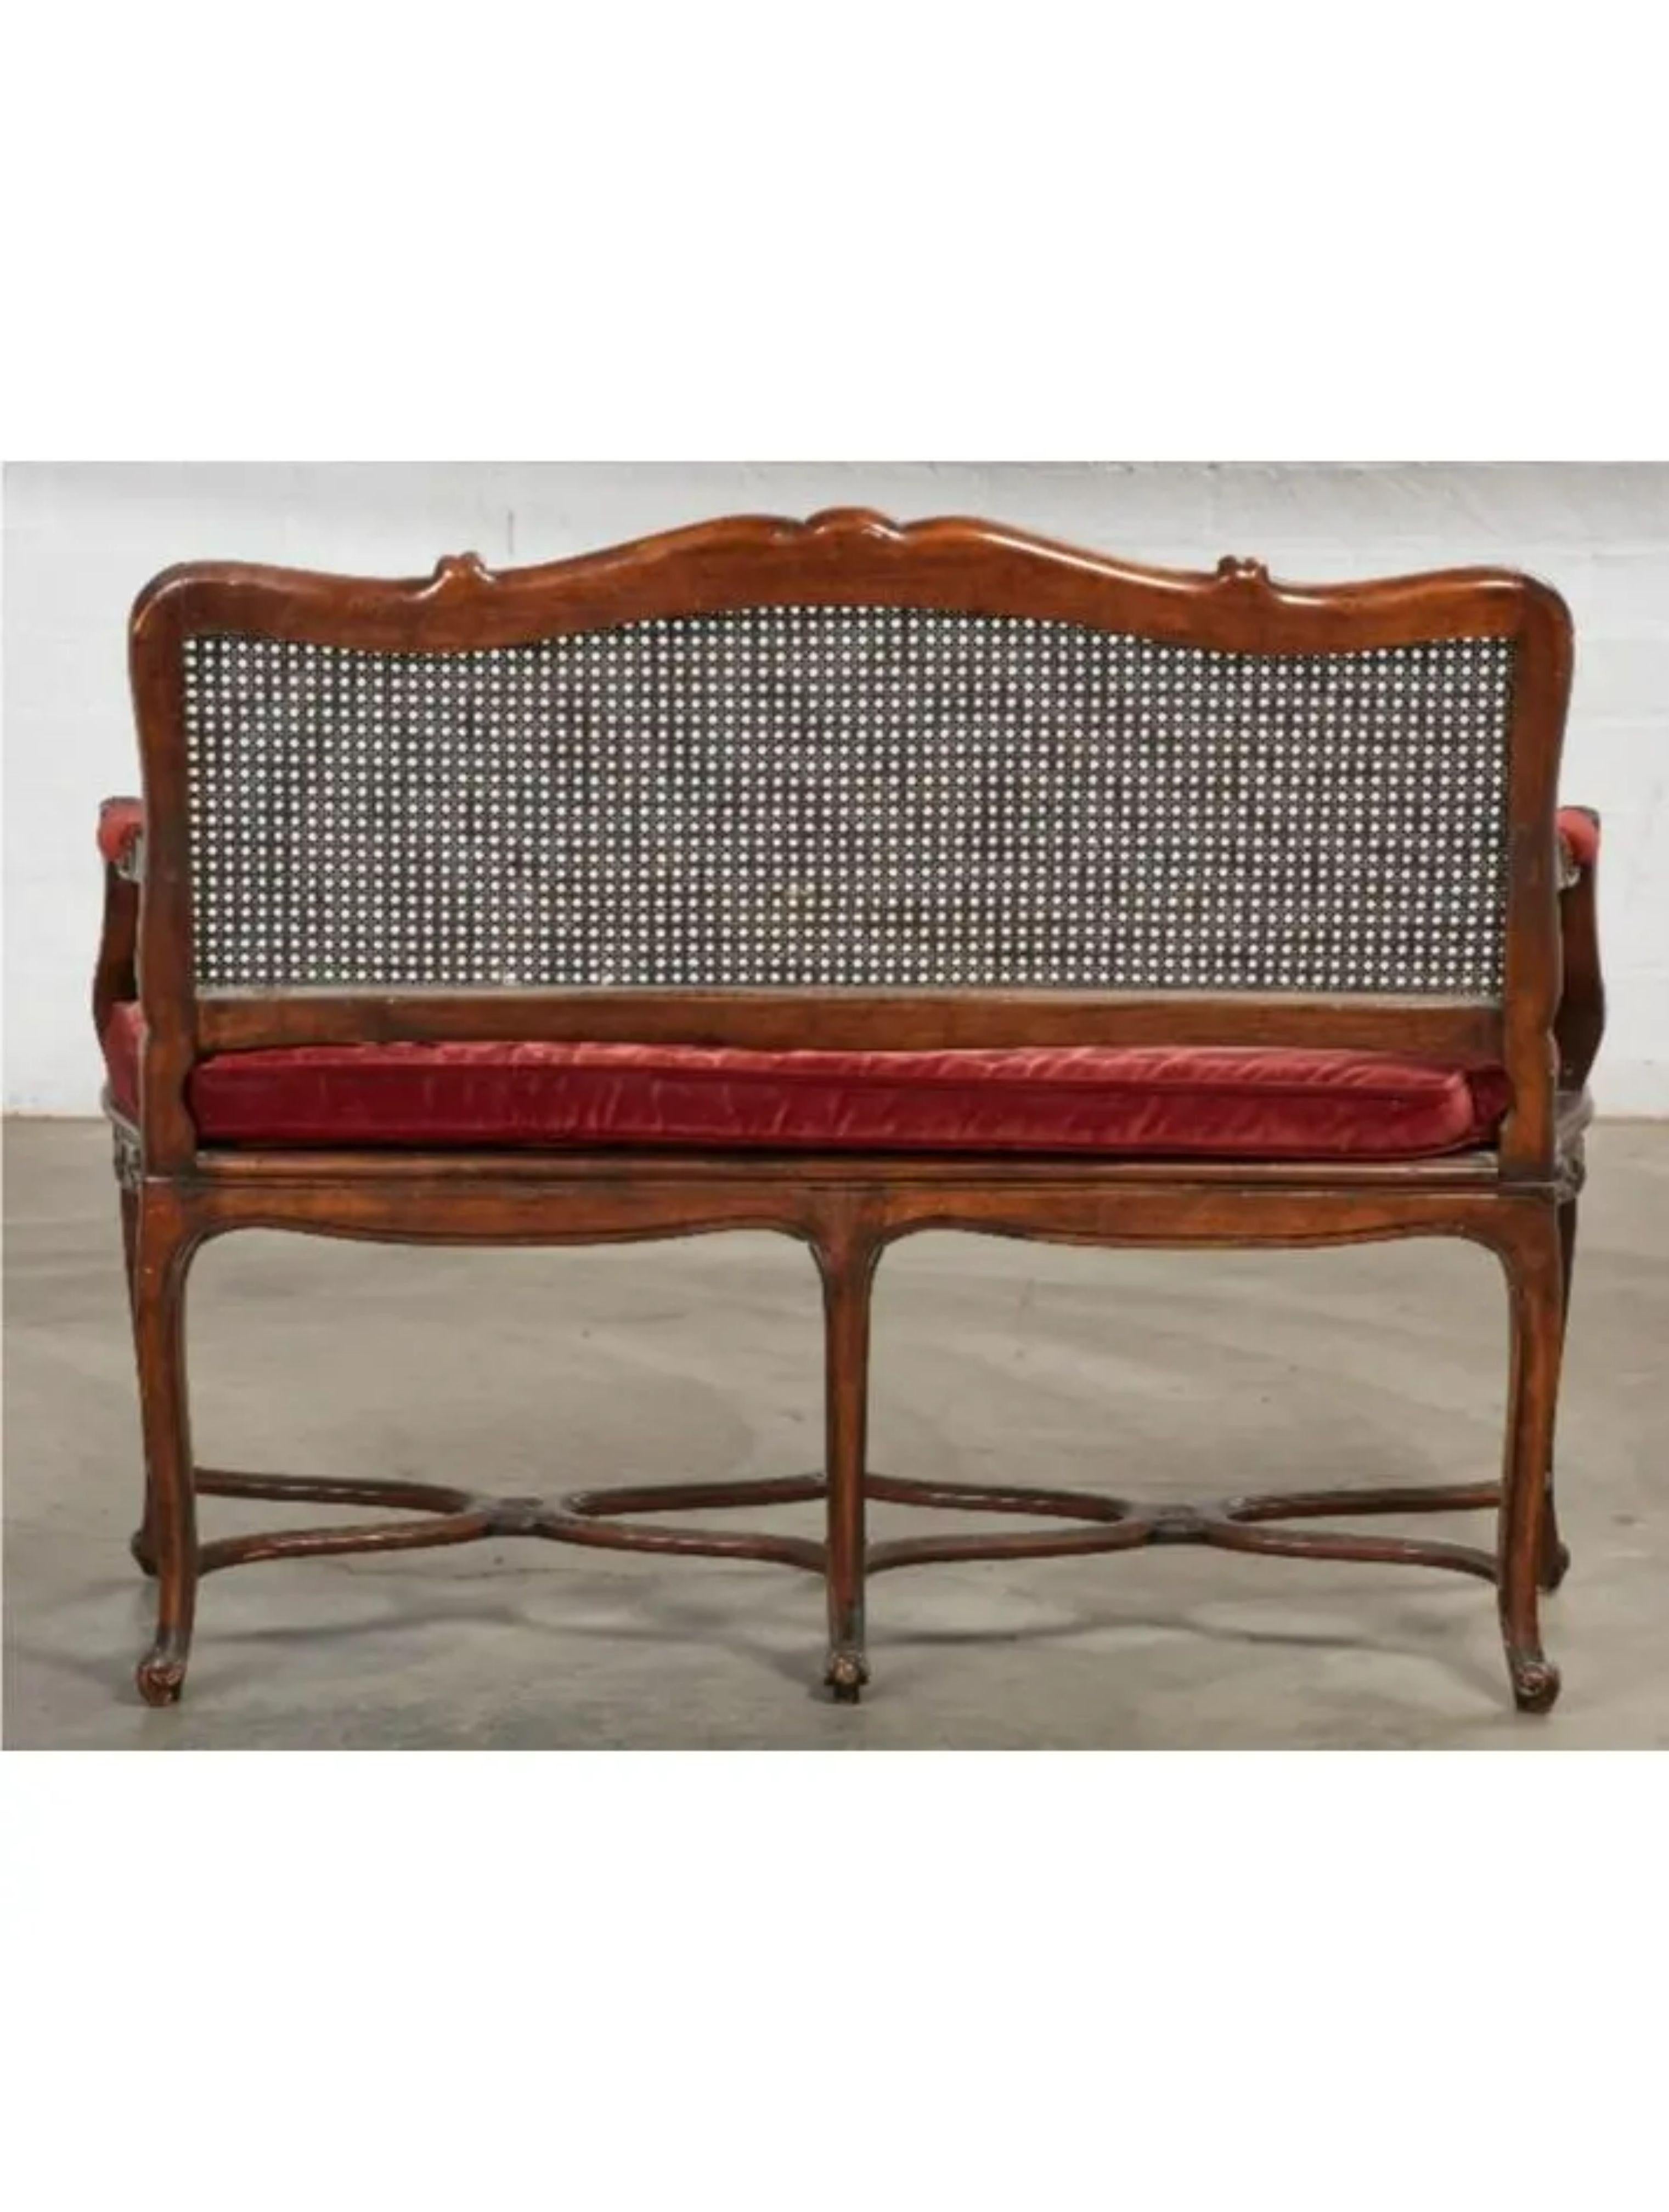 Louis XV Style French provincial carved walnut & cane seat settee. It featured a red velvet down filled cushion covering a cane seat. 

Additional information:
Materials: Caning, Walnut.
Color: Red.
Period: Early 20th century.
Styles: French